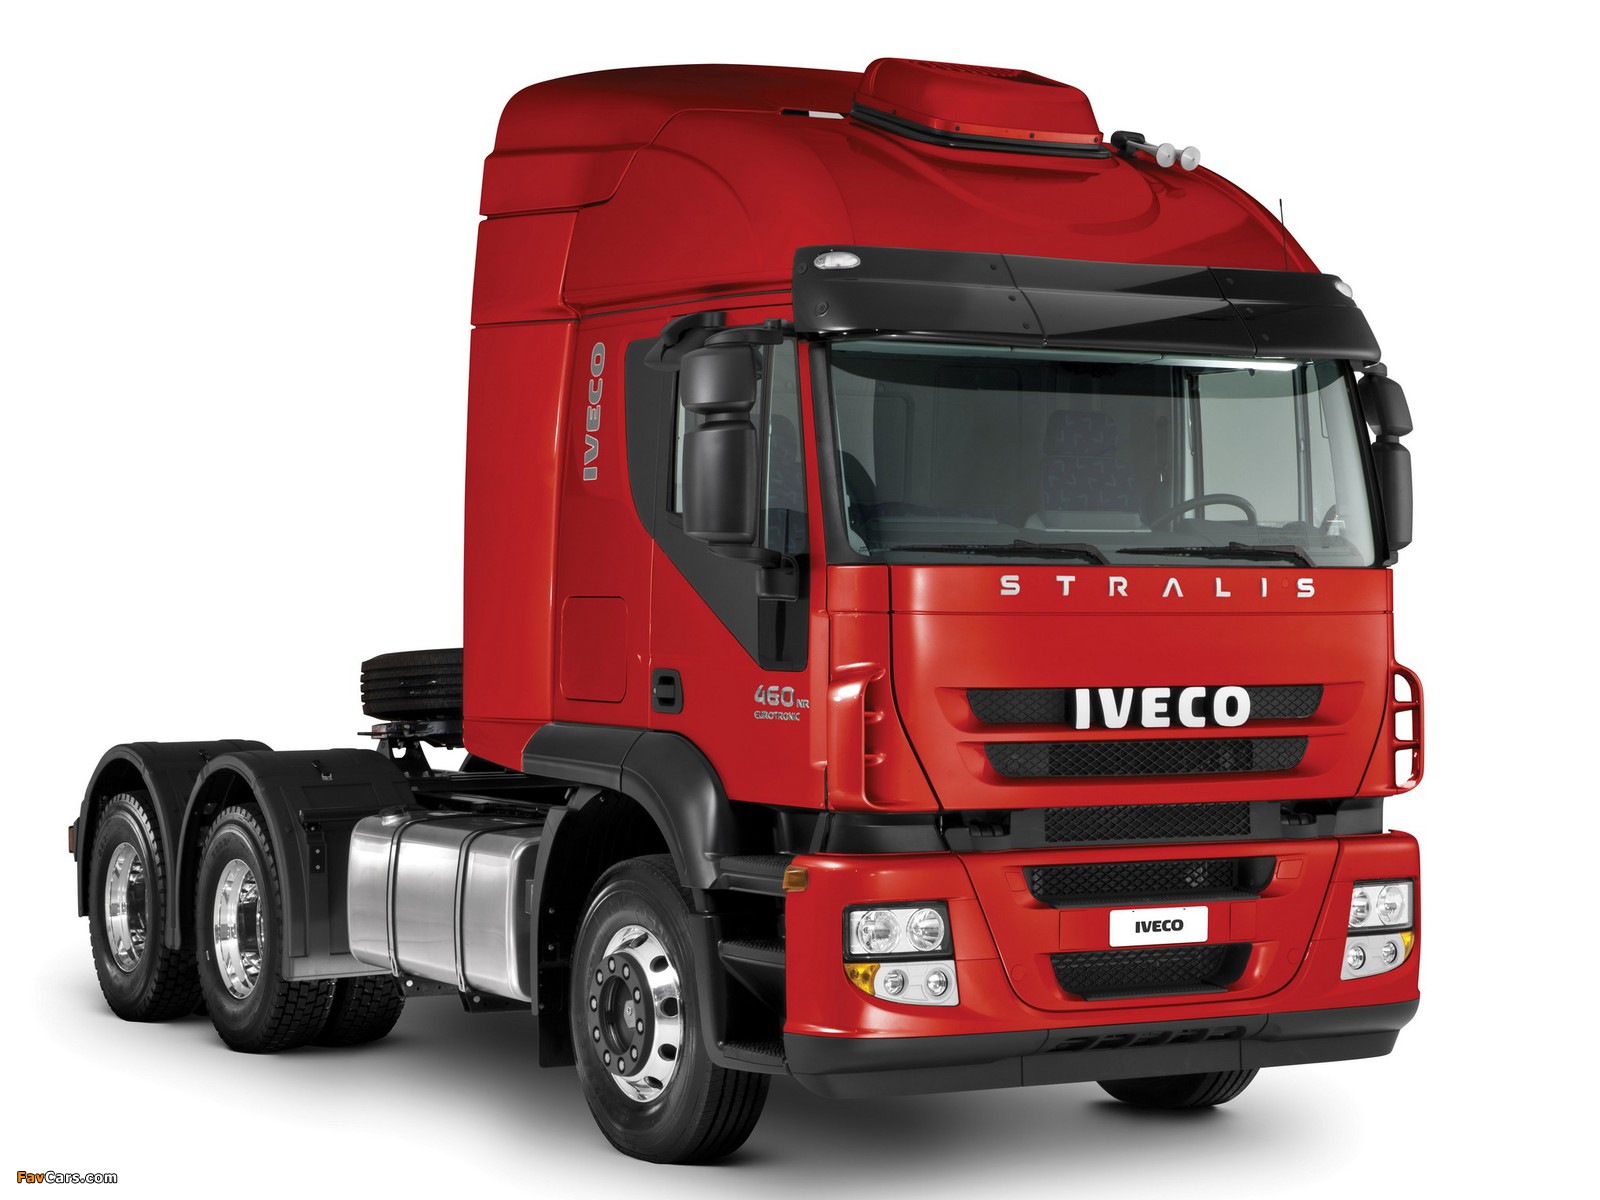 Iveco Stralis NR460 6x4 2010 pictures (1600 x 1200)